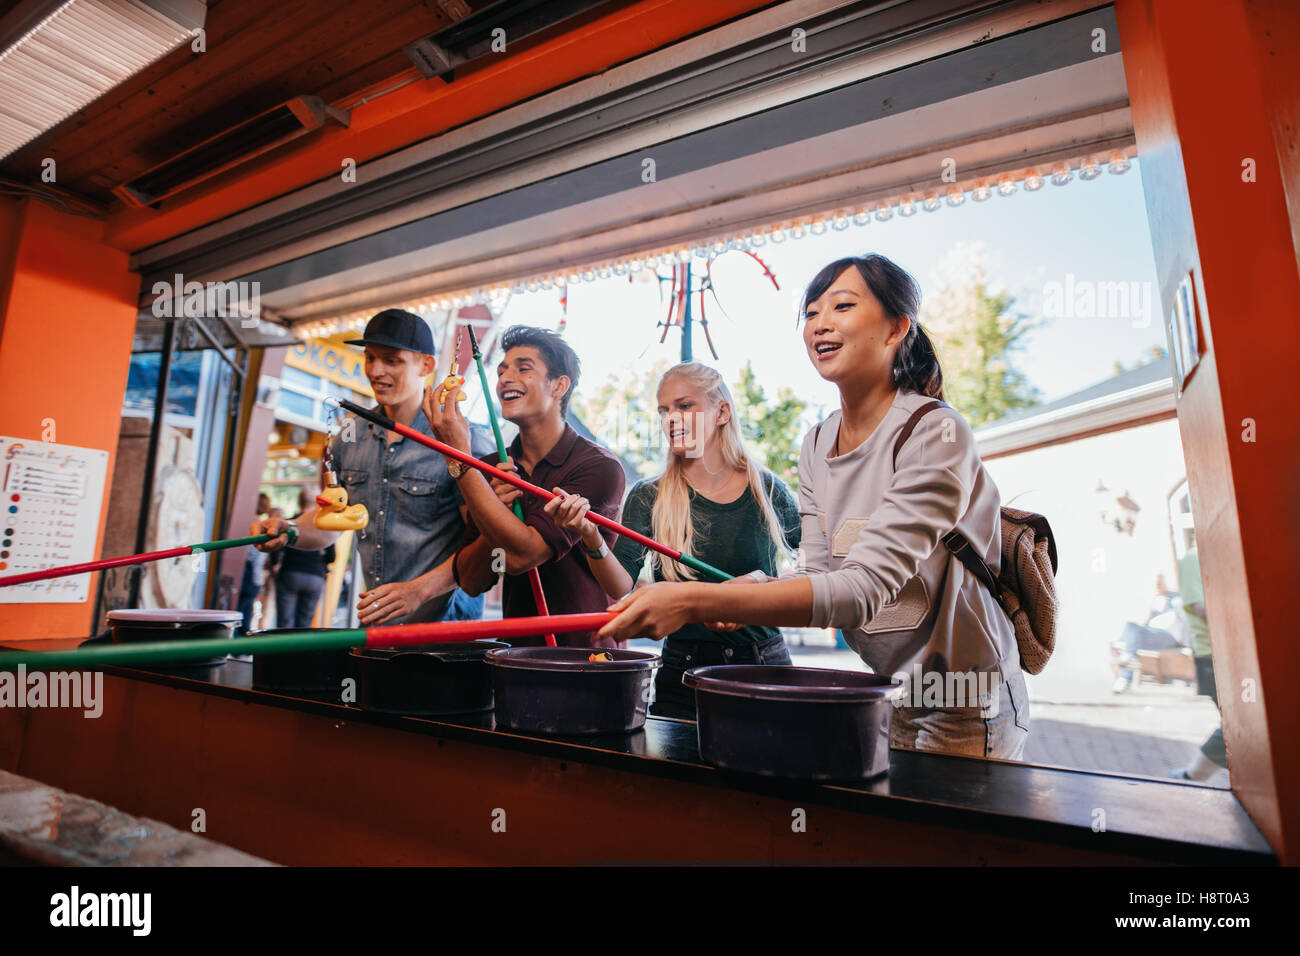 Group of young people having fun with fishing game in amusement park. Multiracial friends playing arcade game. Stock Photo